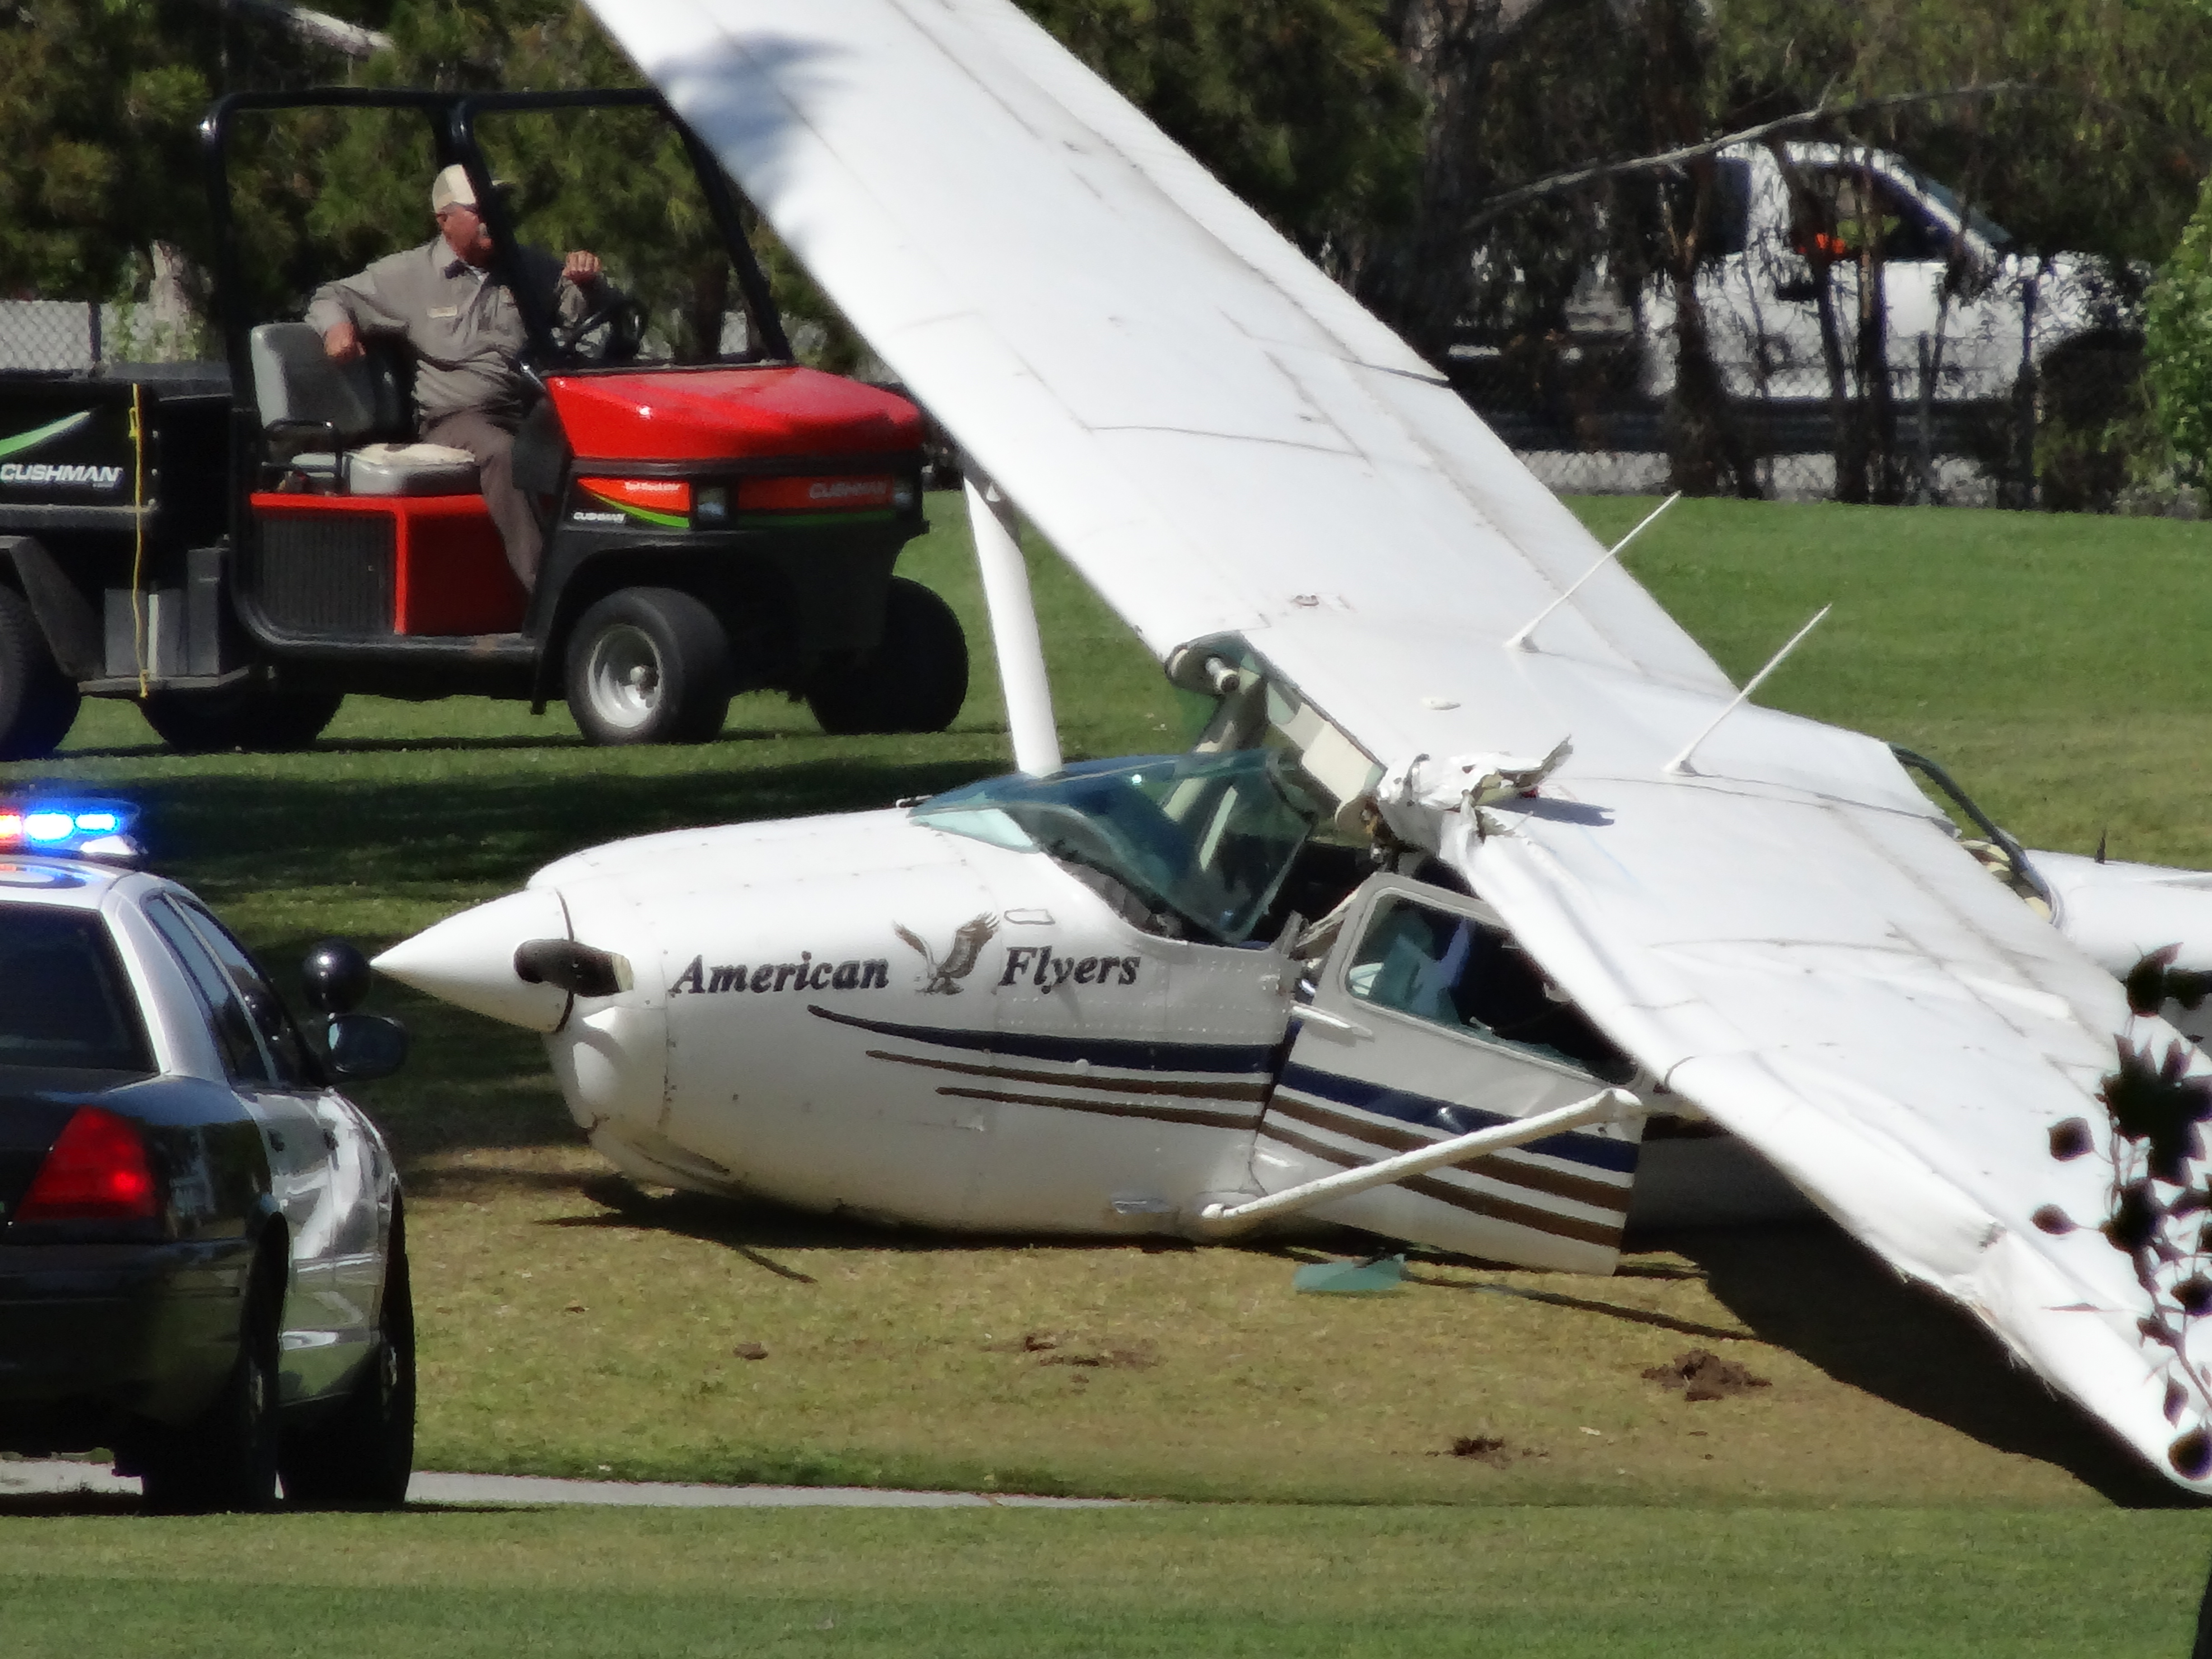 Pictures from Plane Crash